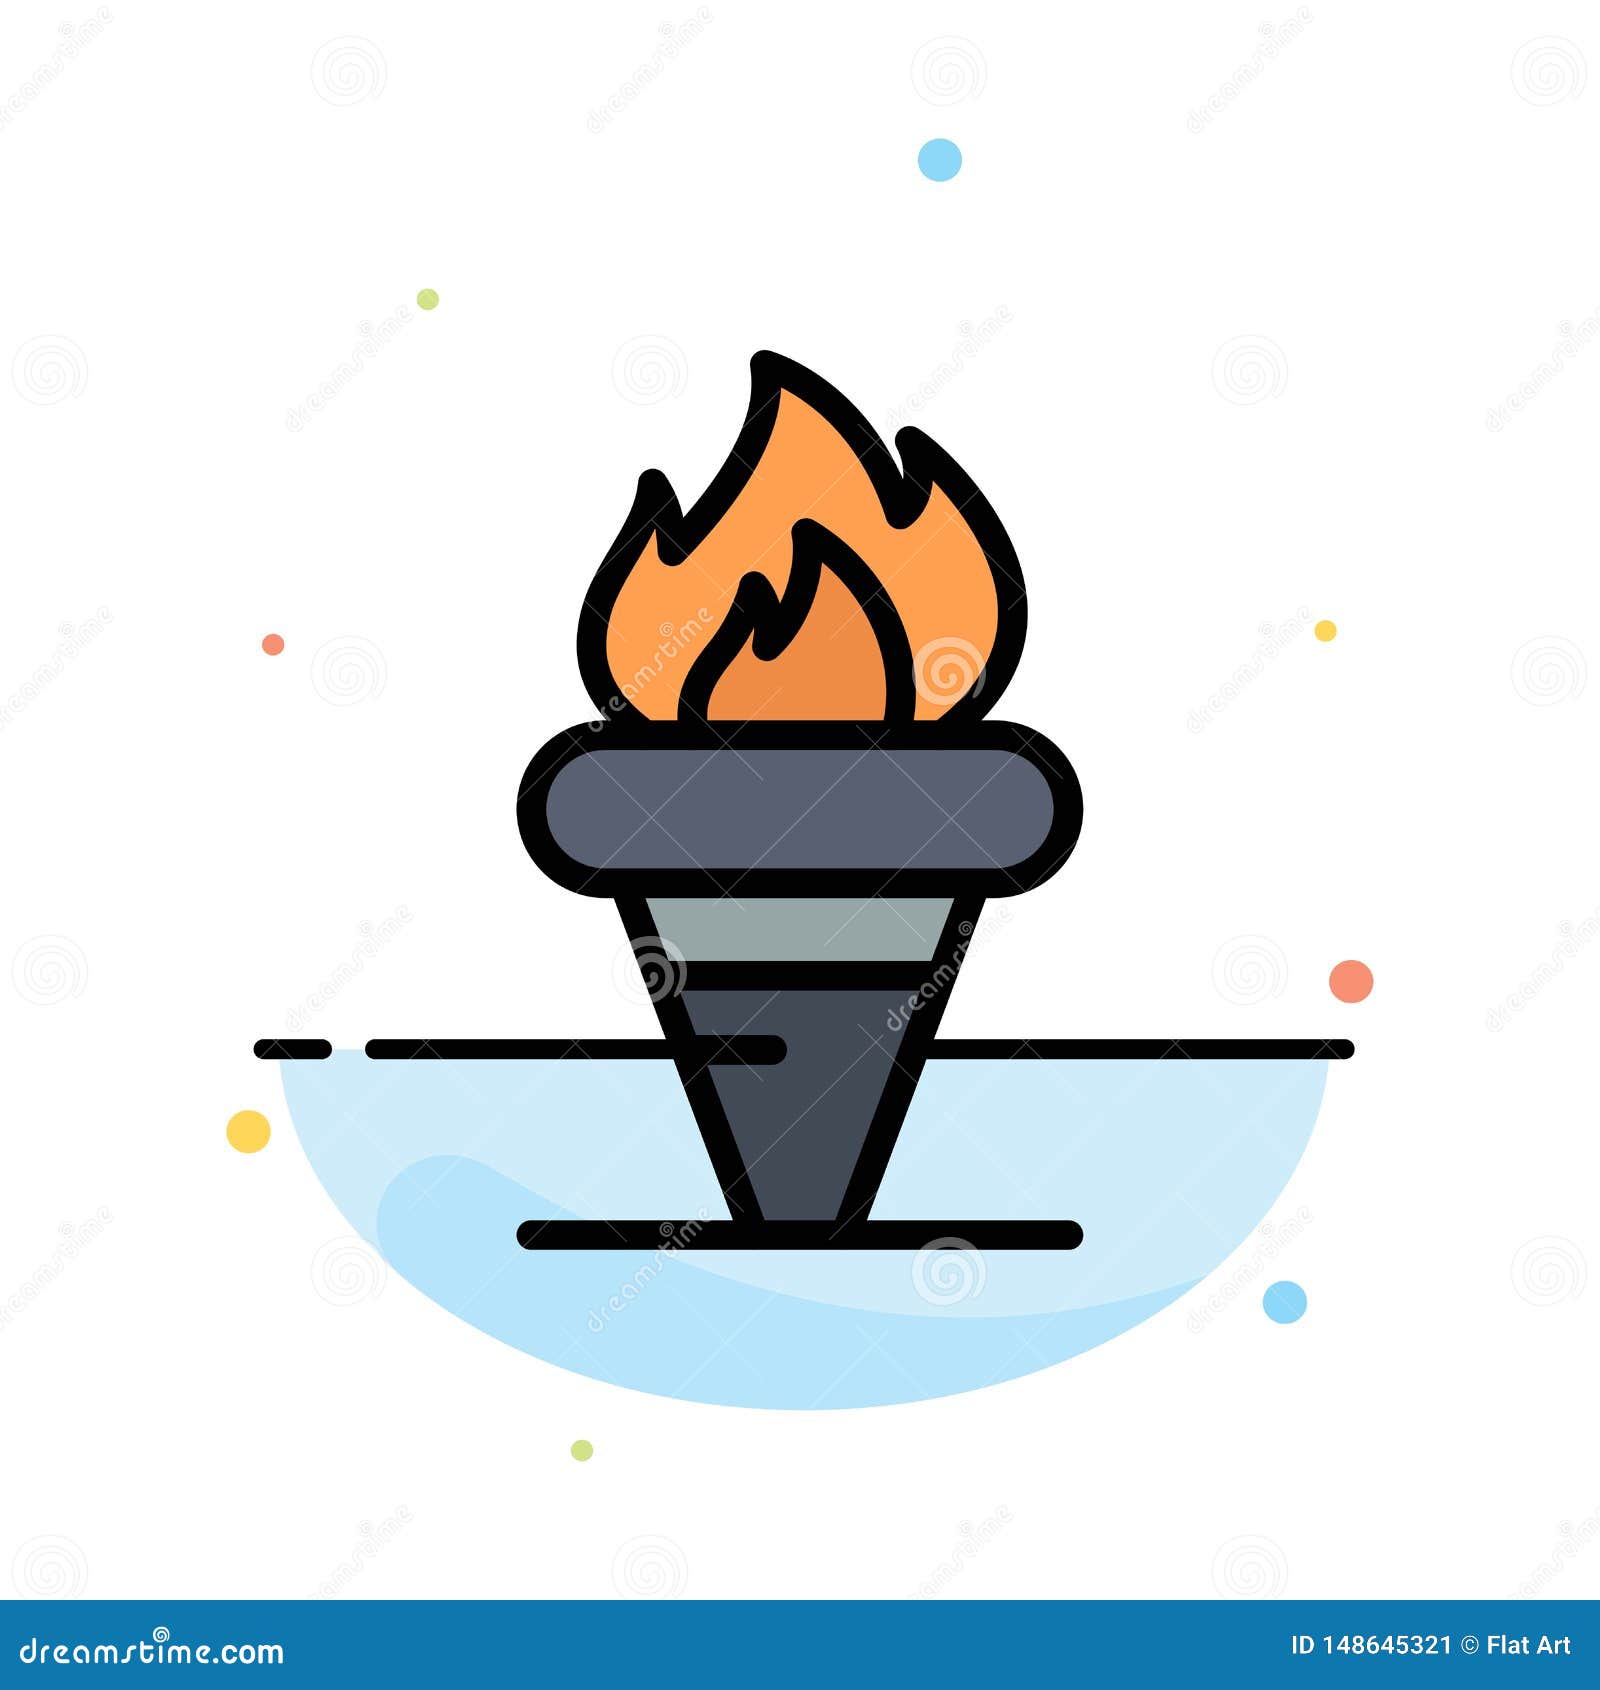 flame, games, greece, holding, olympic abstract flat color icon template